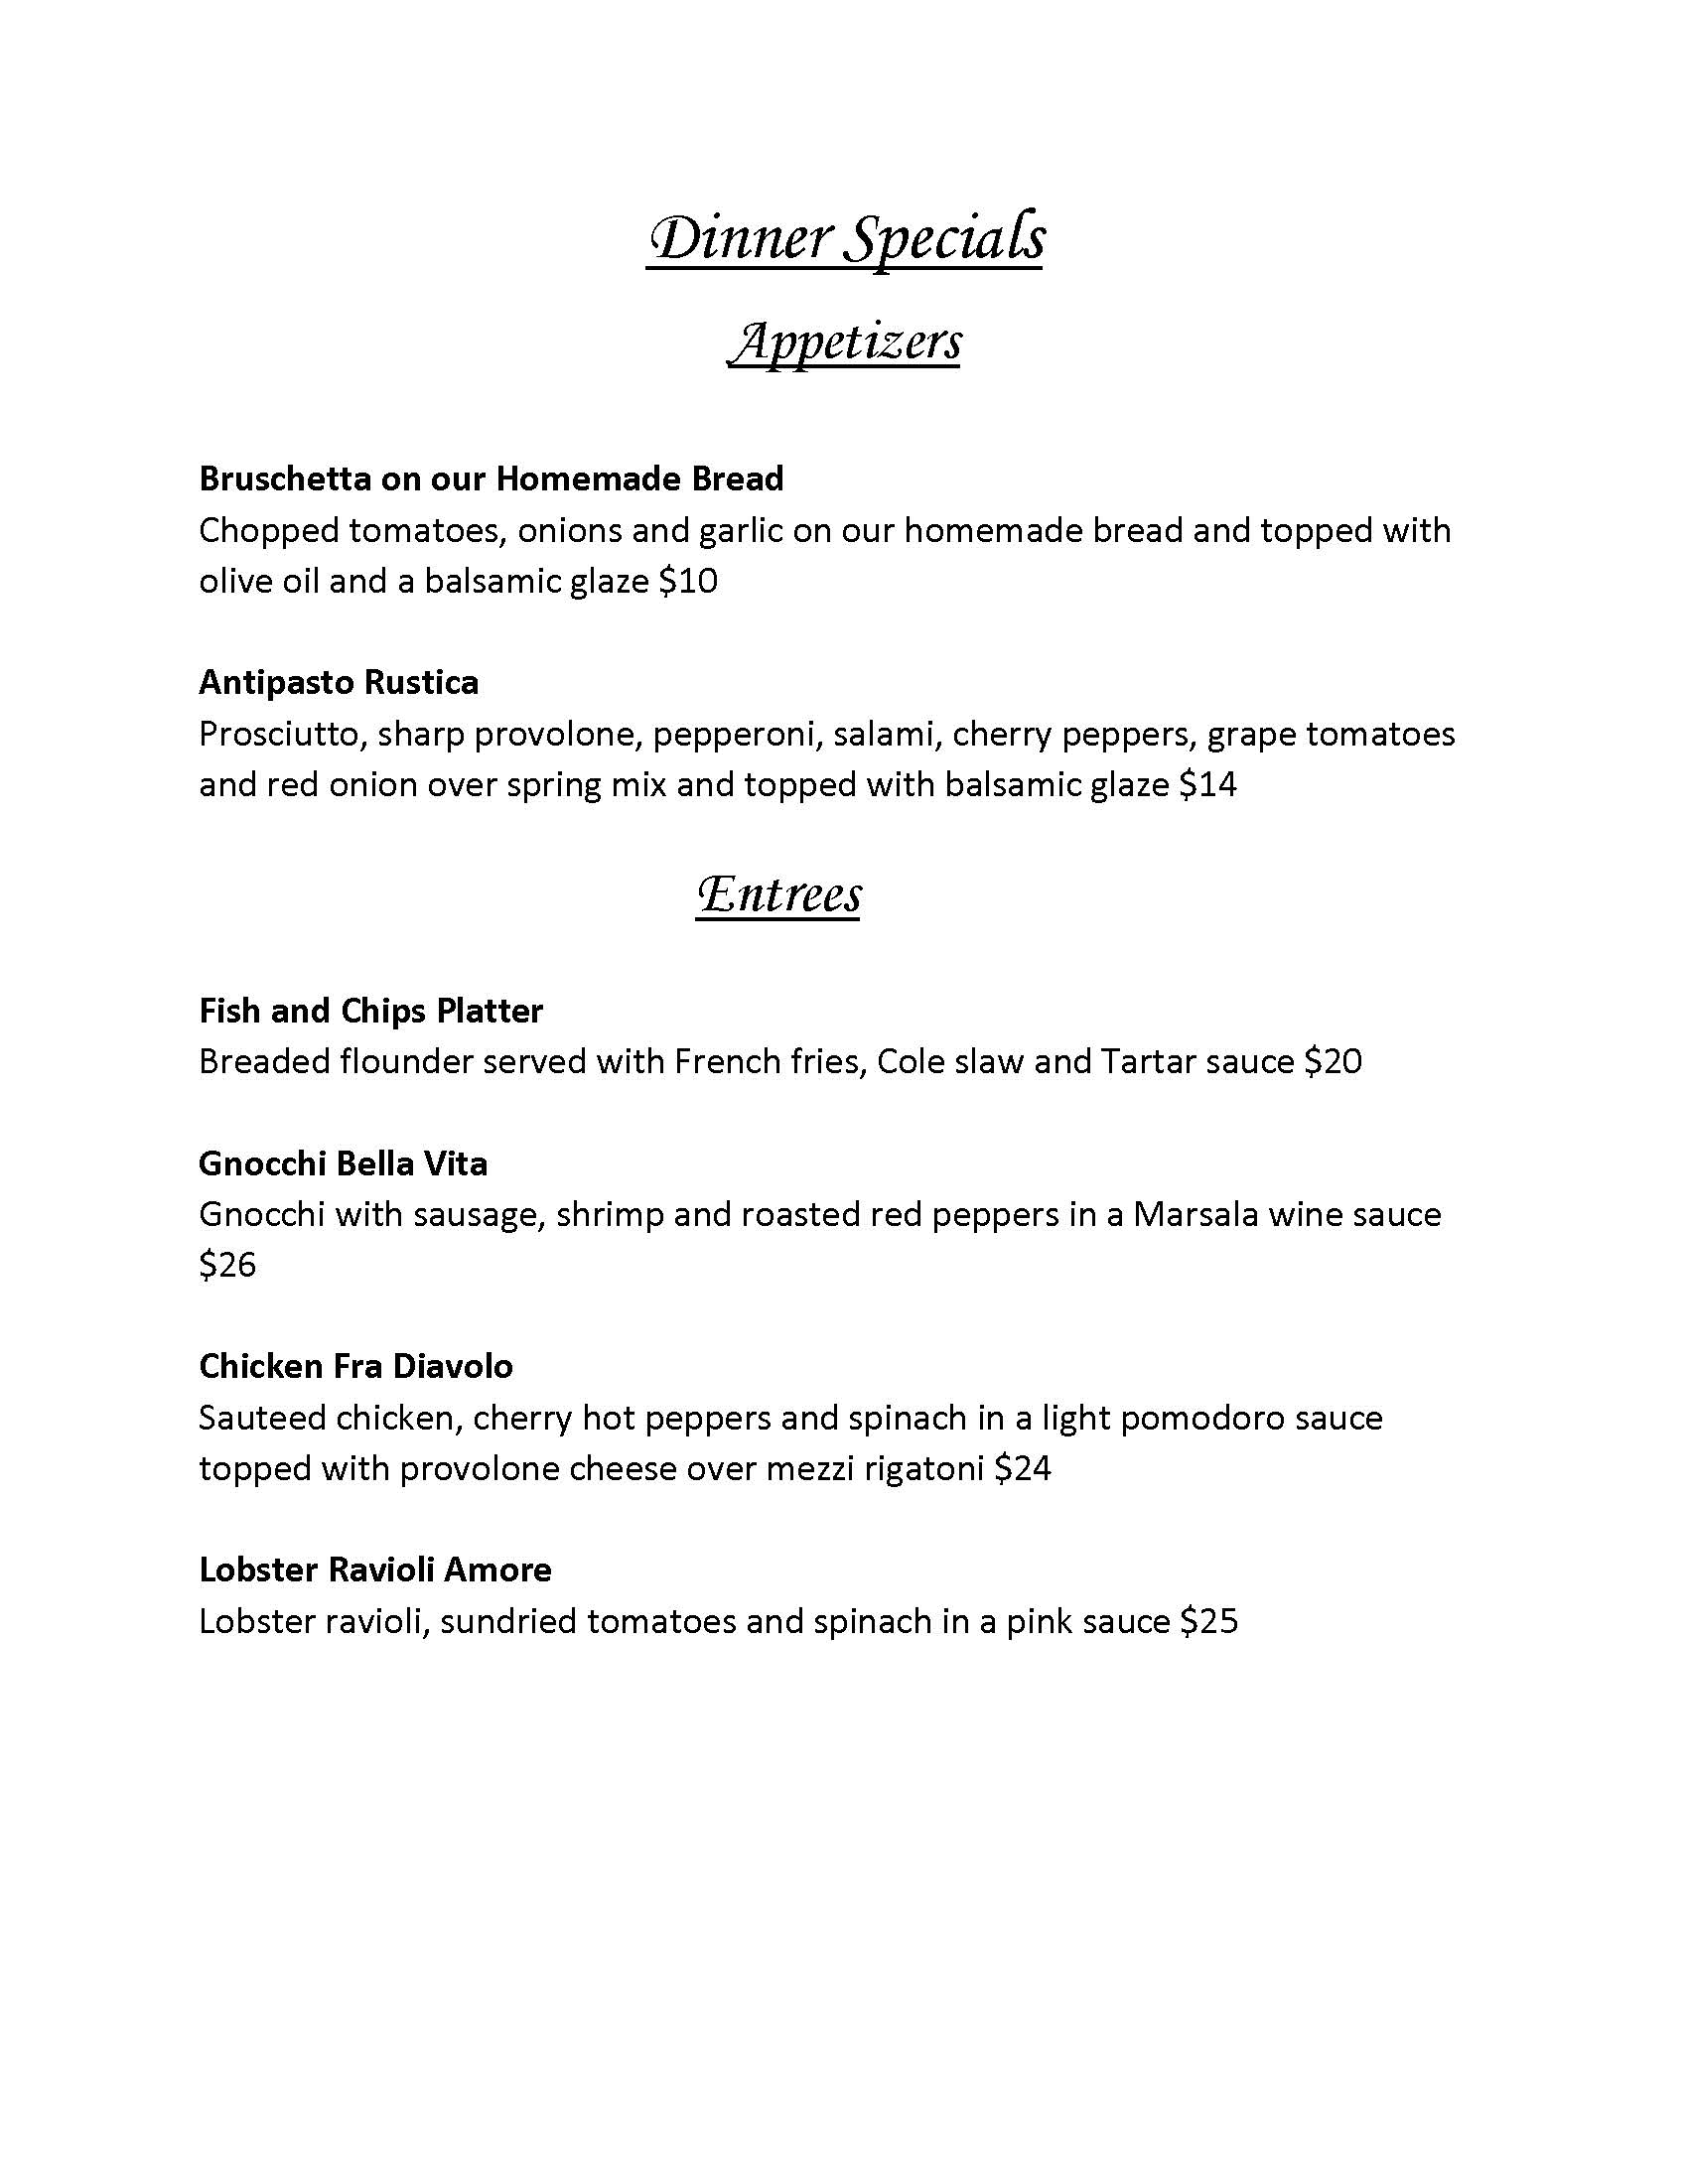 Our Dinner Menu for the weekly Specials